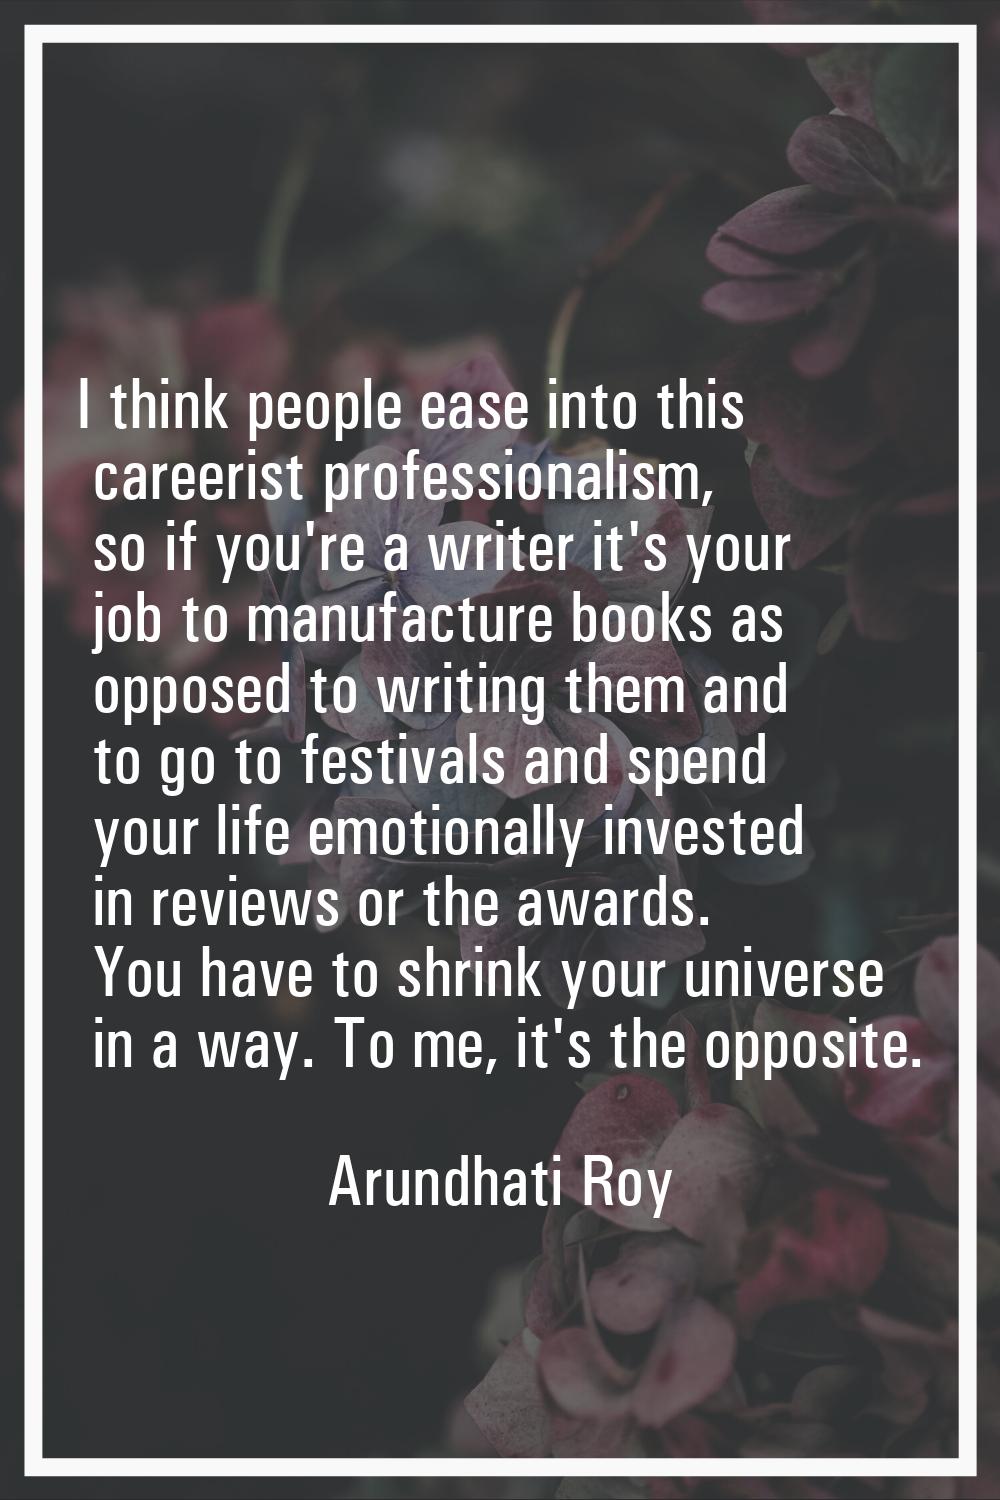 I think people ease into this careerist professionalism, so if you're a writer it's your job to man